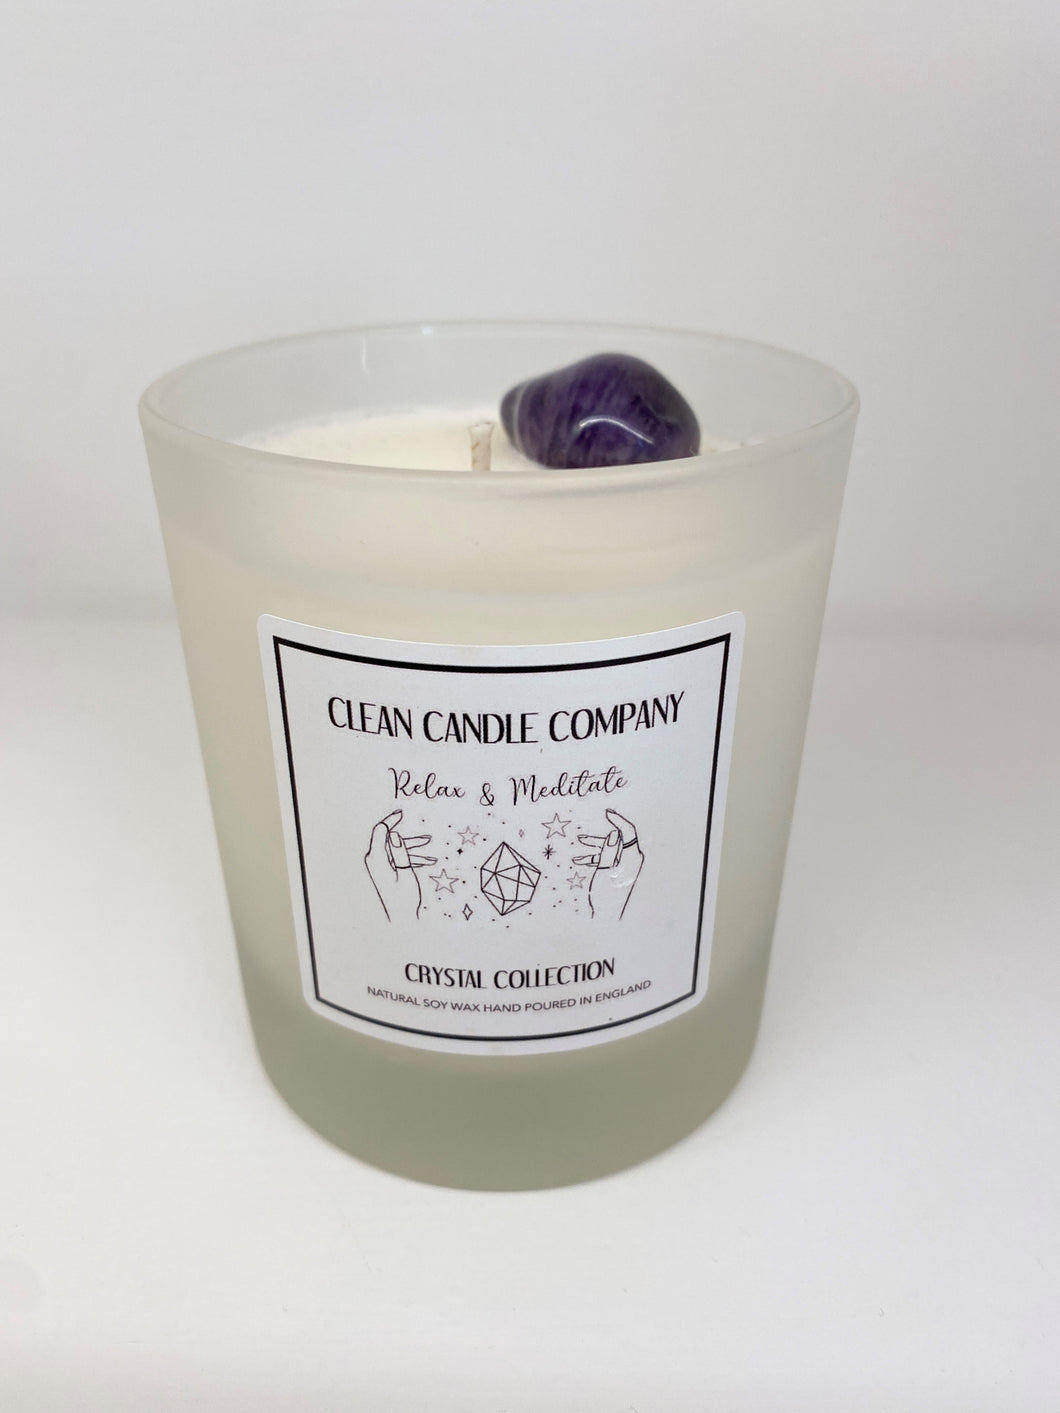 relax and meditate amethyst soy wax crystal candle in transparent jar